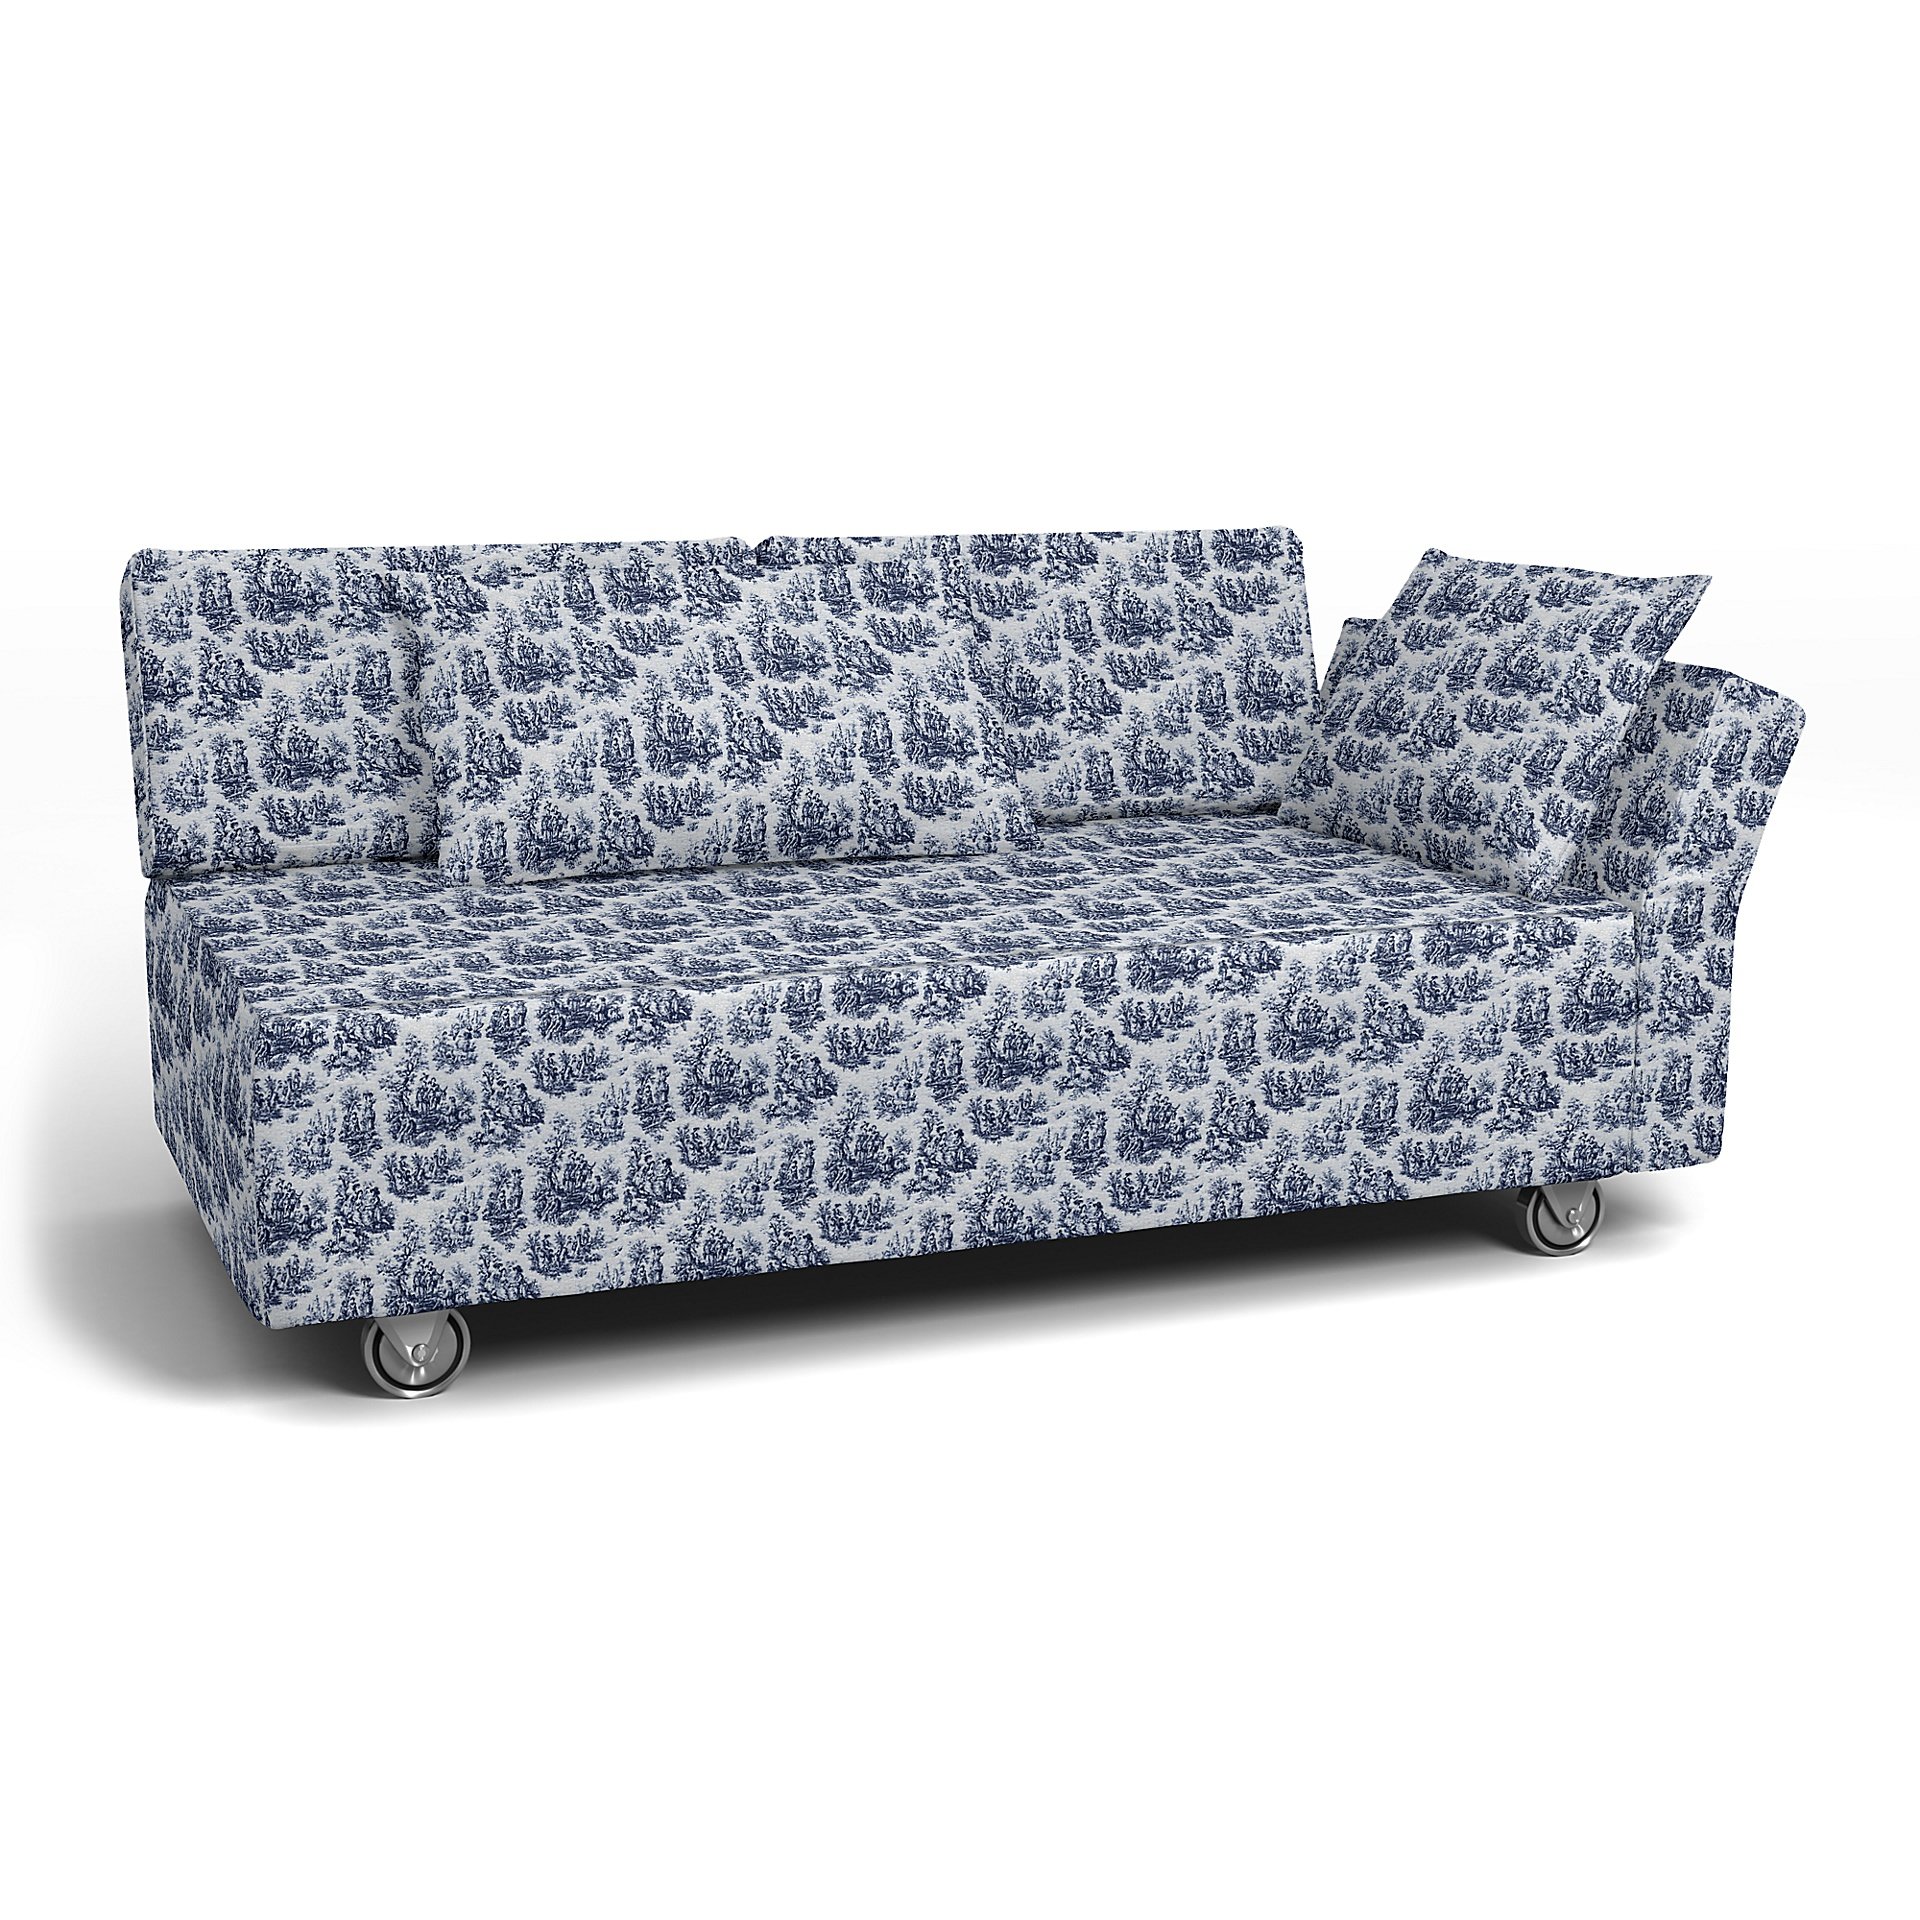 IKEA - Falsterbo 2 Seat Sofa with Right Arm Cover, Dark Blue, Boucle & Texture - Bemz